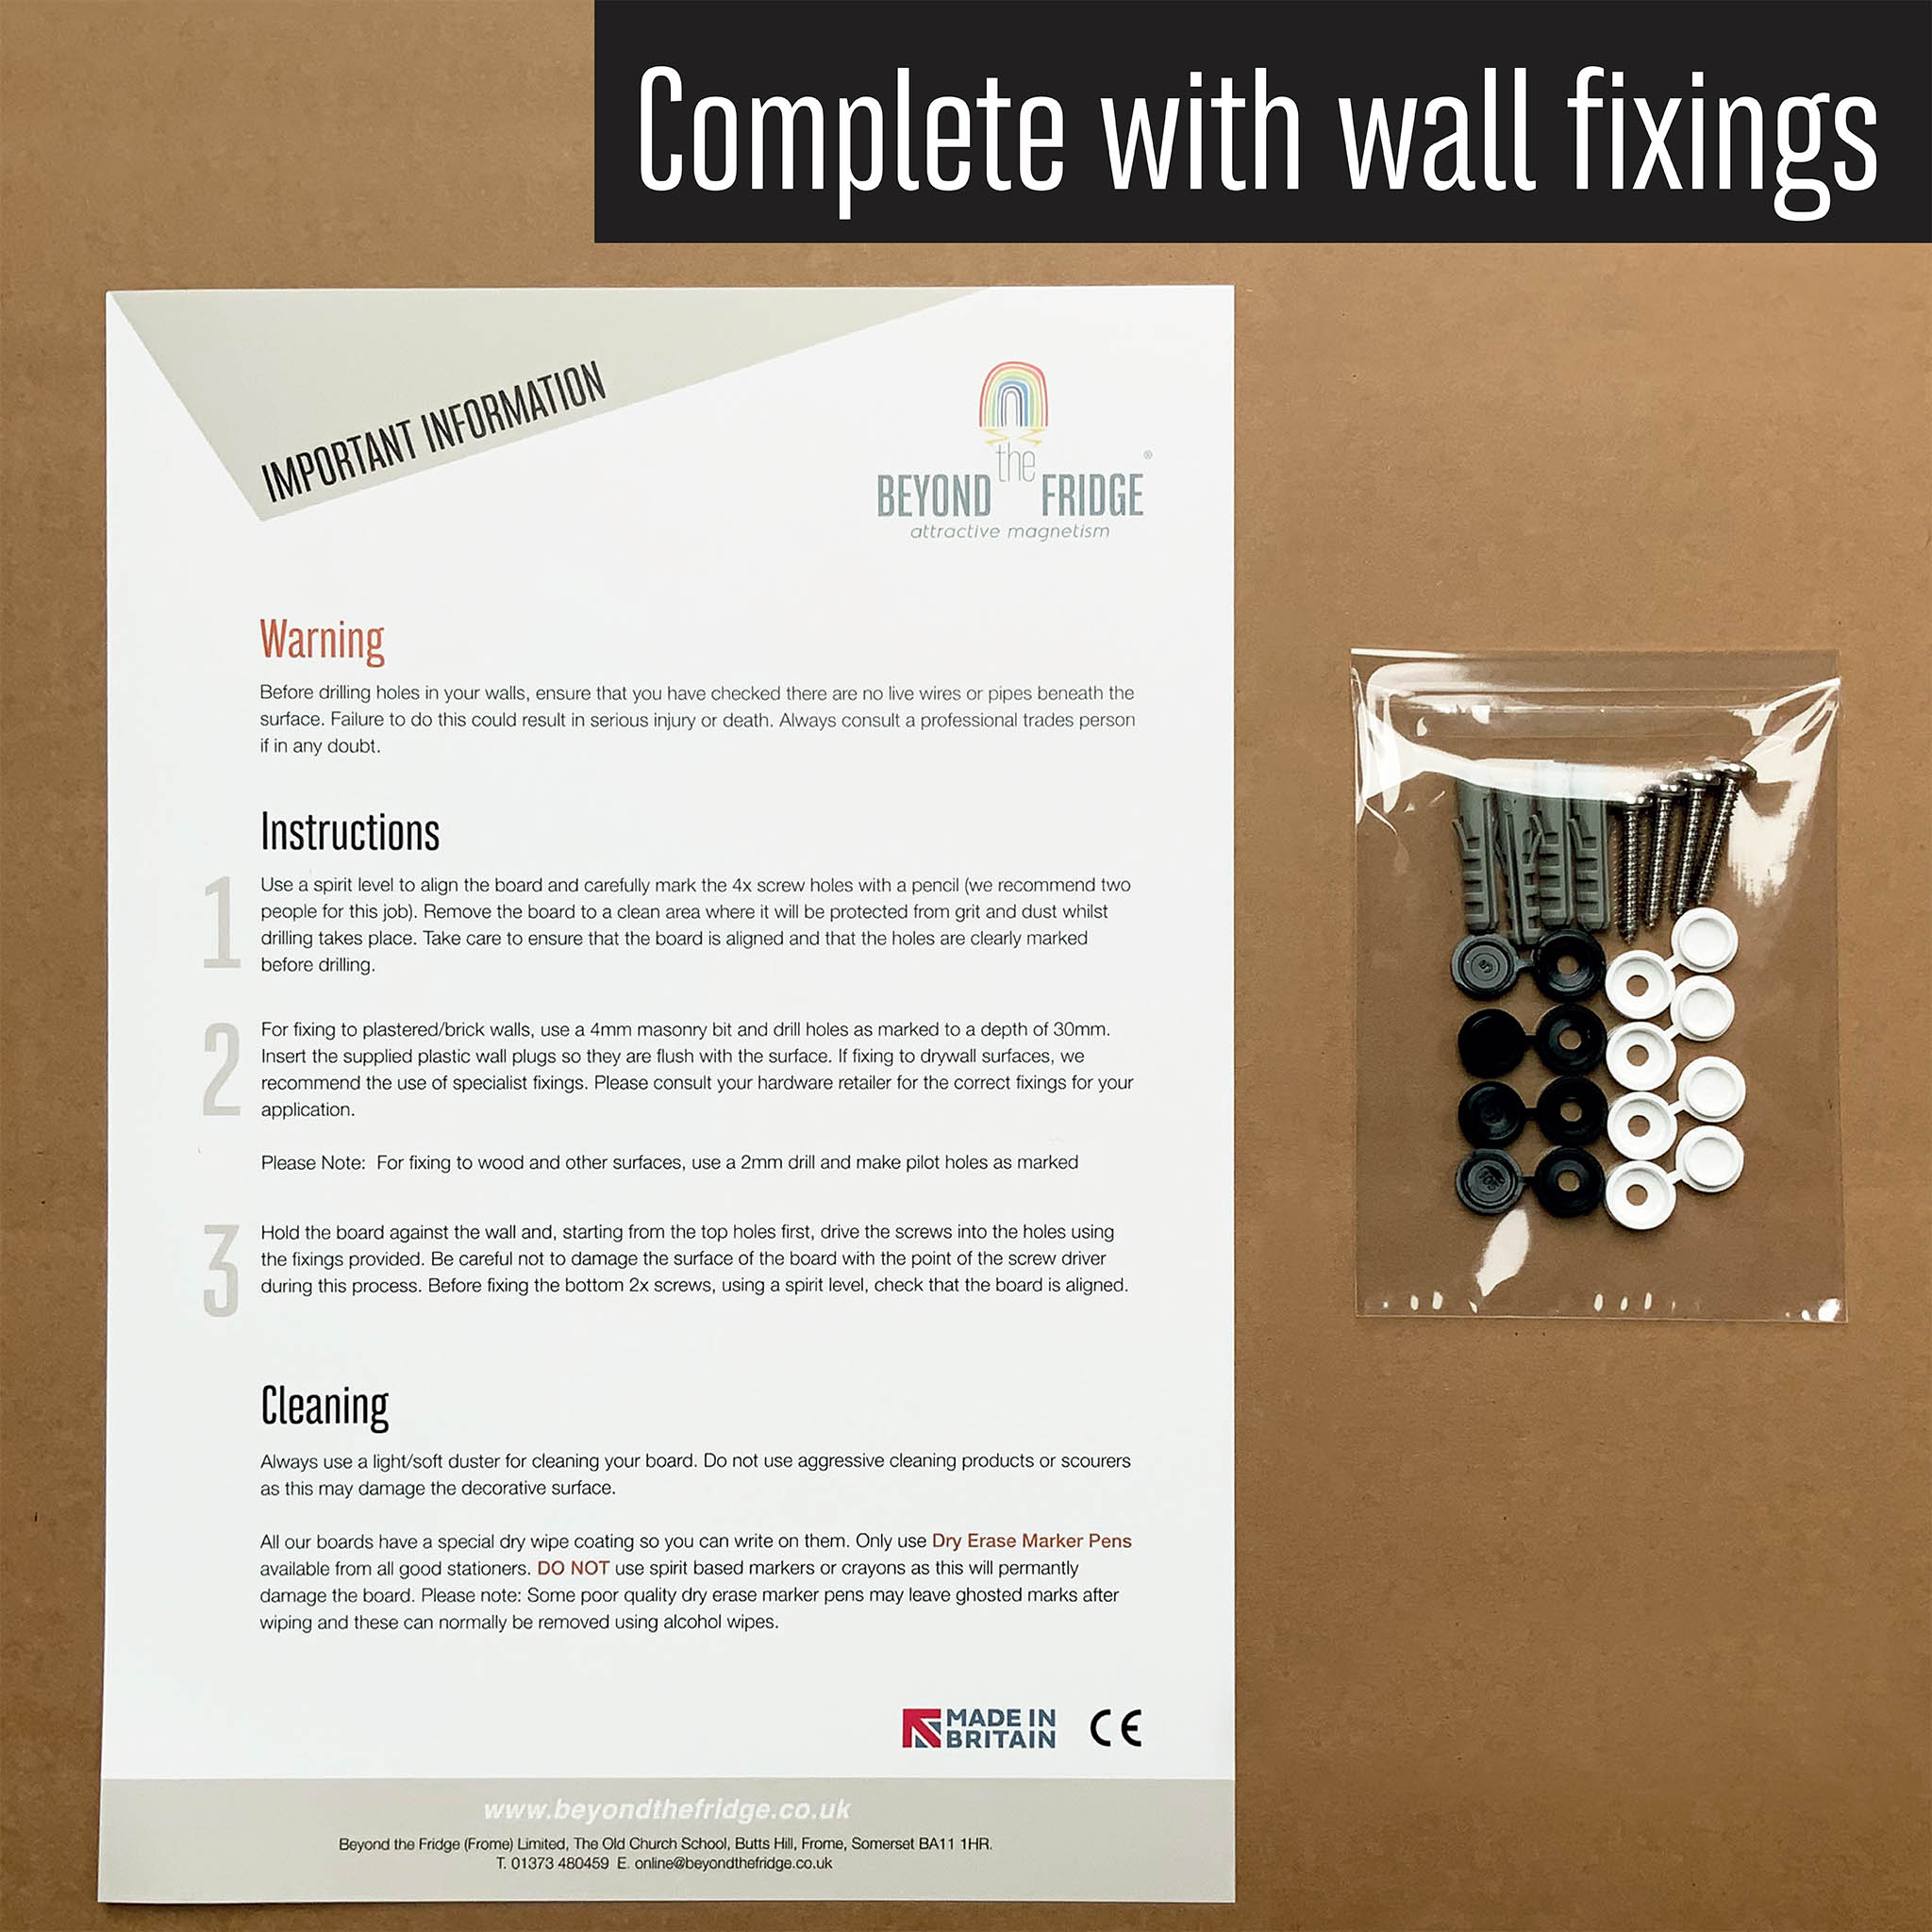 A screw pack and instructions to fit a balancing stones photographic magnetic wall art panel